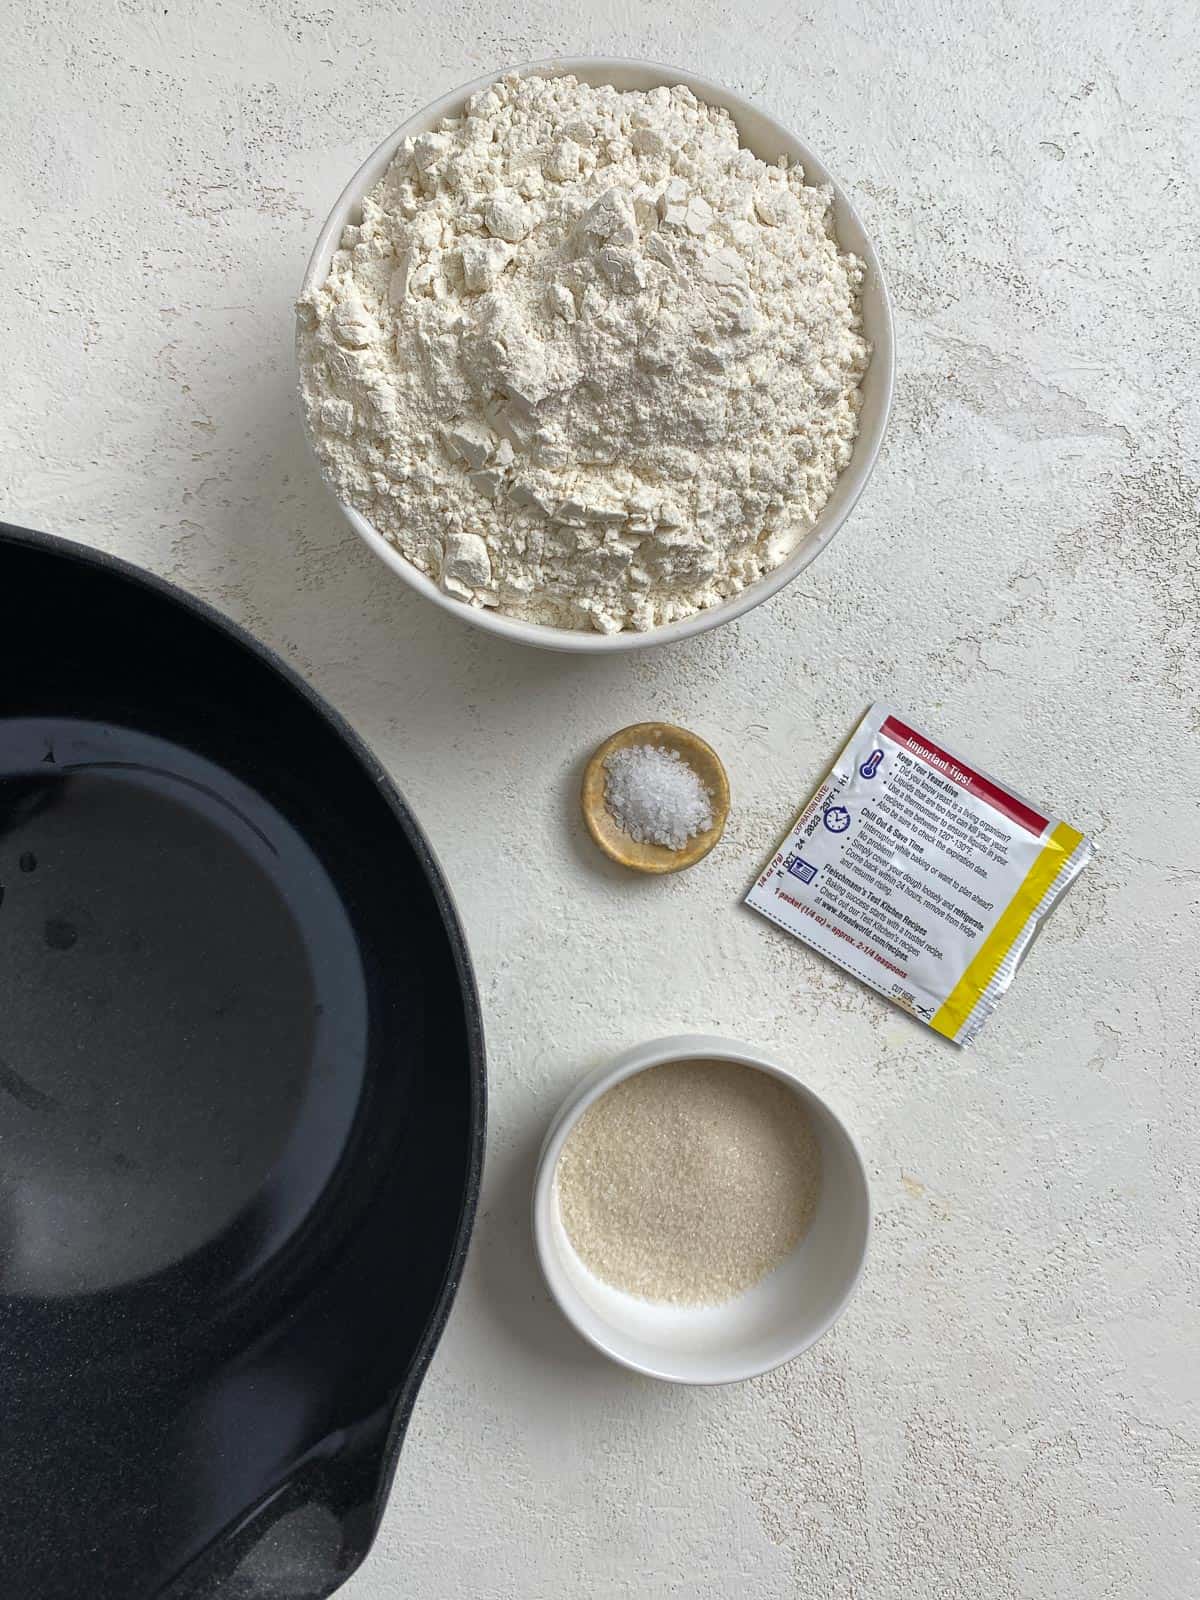 ingredients for These Homemade Vegan Cinnamon Rolls spread out on a white surface